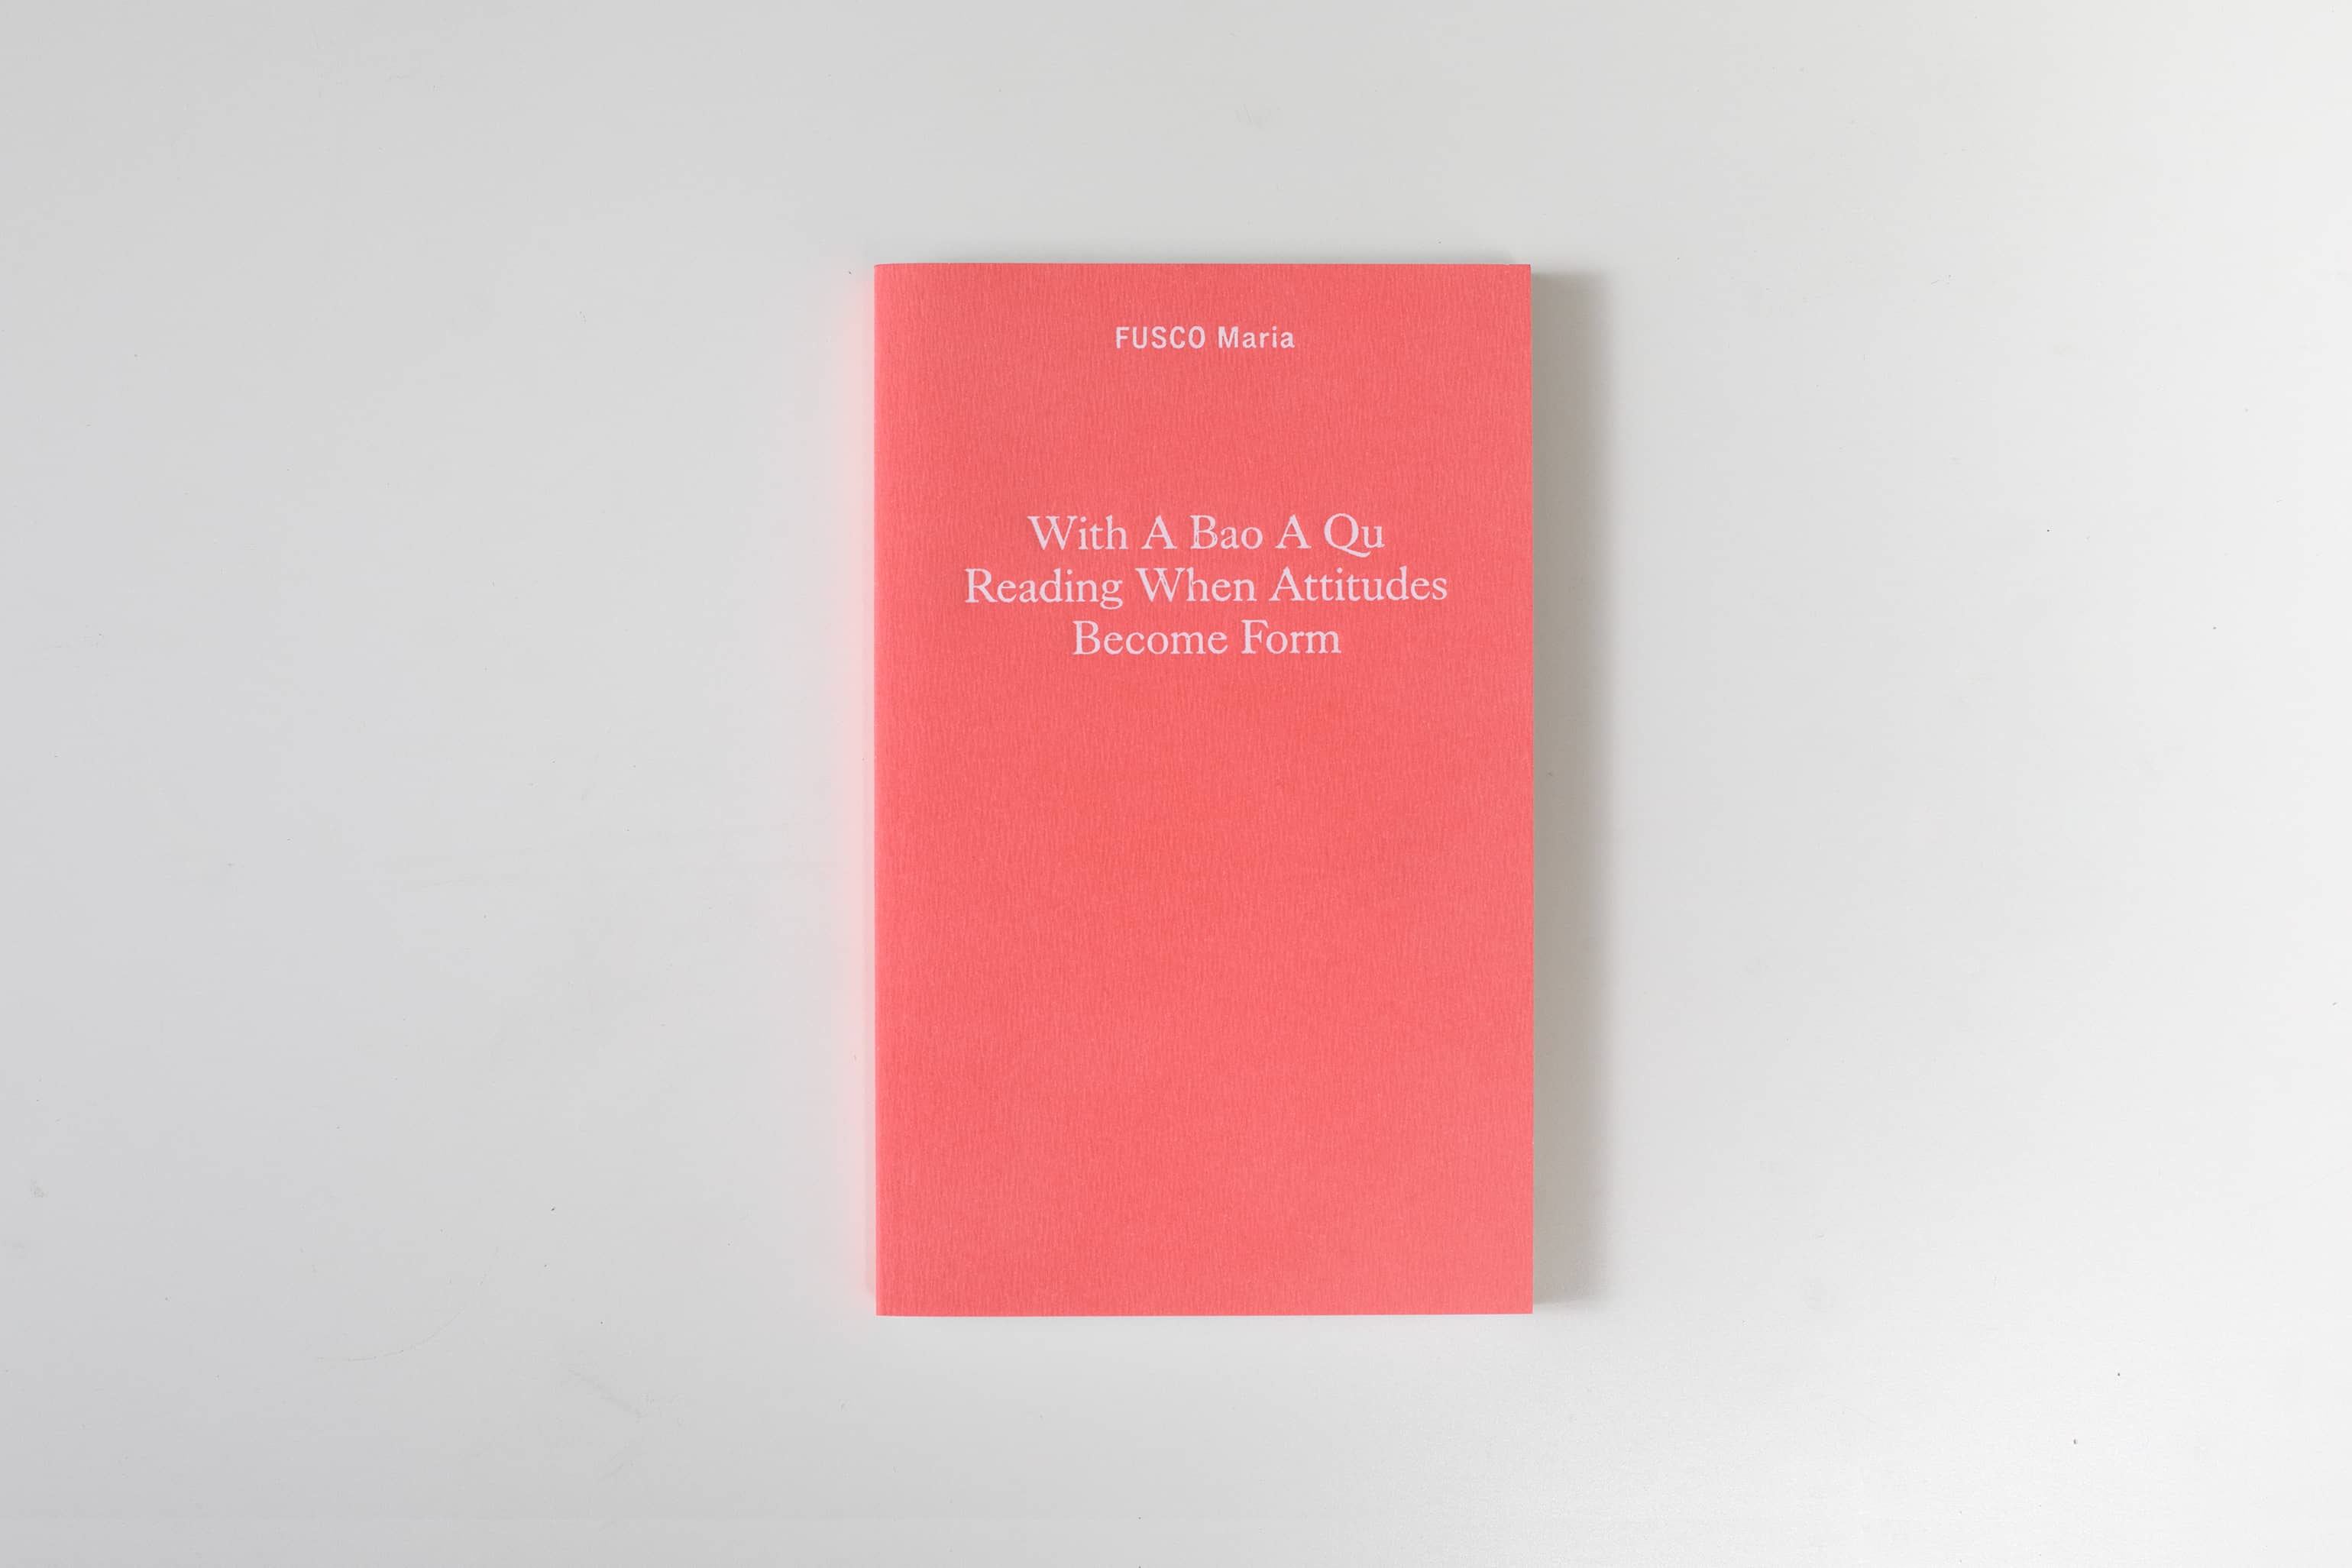 First We Feel Then We Fall - Guy Yanai - Sternthal Books